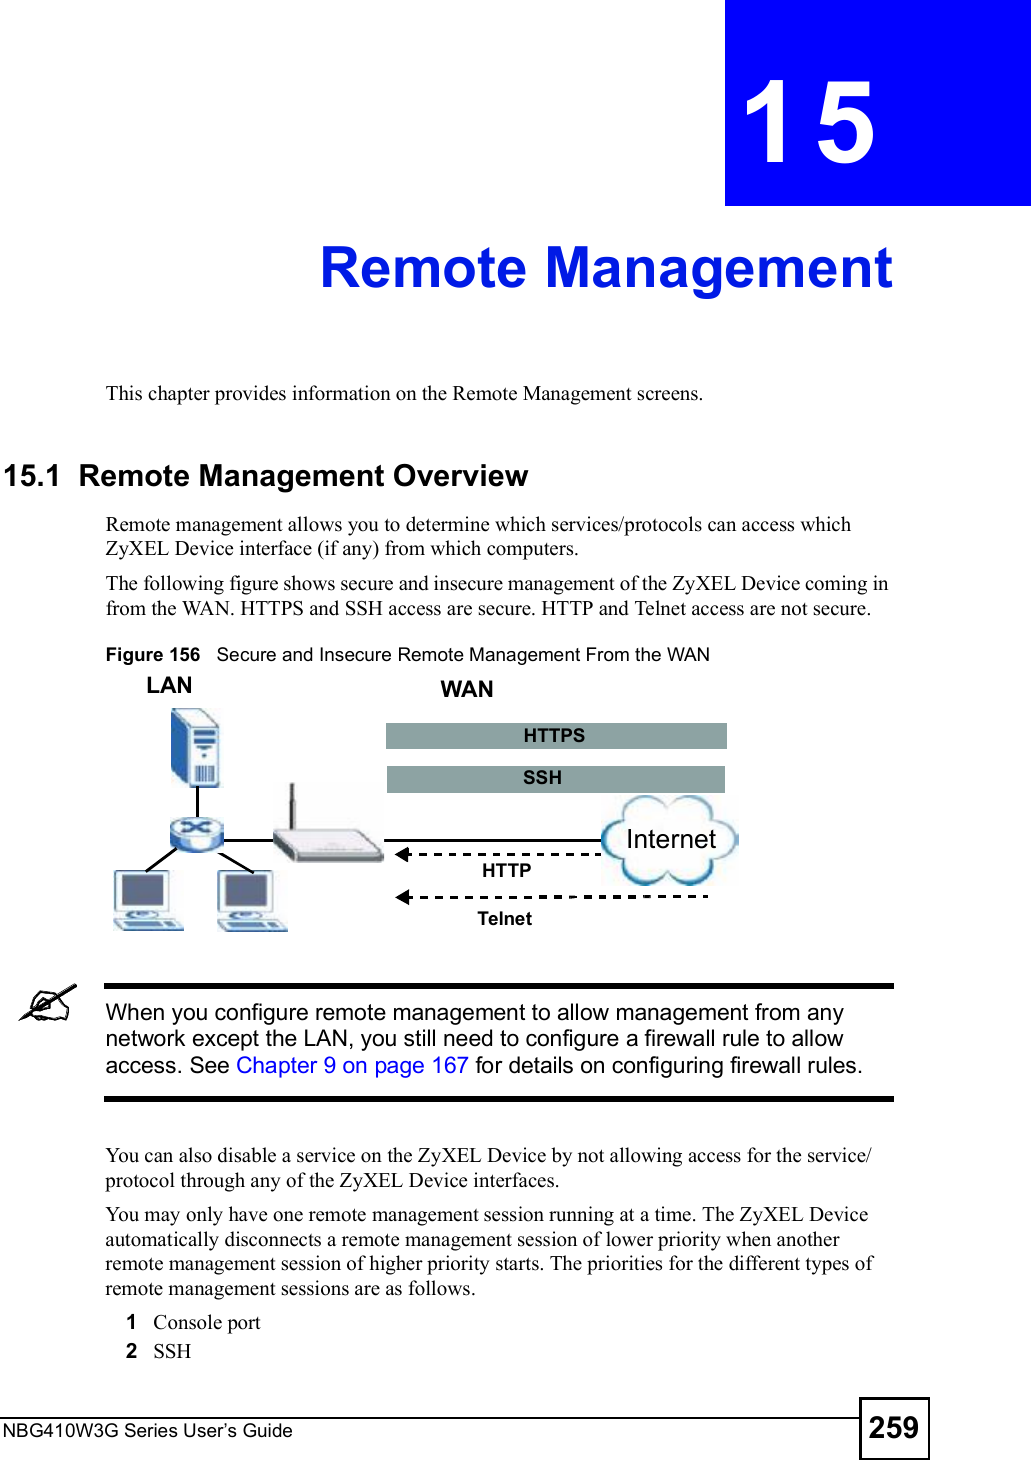 NBG410W3G Series User s Guide 259CHAPTER  15 Remote ManagementThis chapter provides information on the Remote Management screens.15.1  Remote Management OverviewRemote management allows you to determine which services/protocols can access which ZyXEL Device interface (if any) from which computers.The following figure shows secure and insecure management of the ZyXEL Device coming in from the WAN. HTTPS and SSH access are secure. HTTP and Telnet access are not secure. Figure 156   Secure and Insecure Remote Management From the WANWhen you configure remote management to allow management from any network except the LAN, you still need to configure a firewall rule to allow access. See Chapter 9 on page 167 for details on configuring firewall rules.You can also disable a service on the ZyXEL Device by not allowing access for the service/protocol through any of the ZyXEL Device interfaces.You may only have one remote management session running at a time. The ZyXEL Device automatically disconnects a remote management session of lower priority when another remote management session of higher priority starts. The priorities for the different types of remote management sessions are as follows.1Console port2SSH LAN WANHTTPTelnetInternetHTTPSSSH